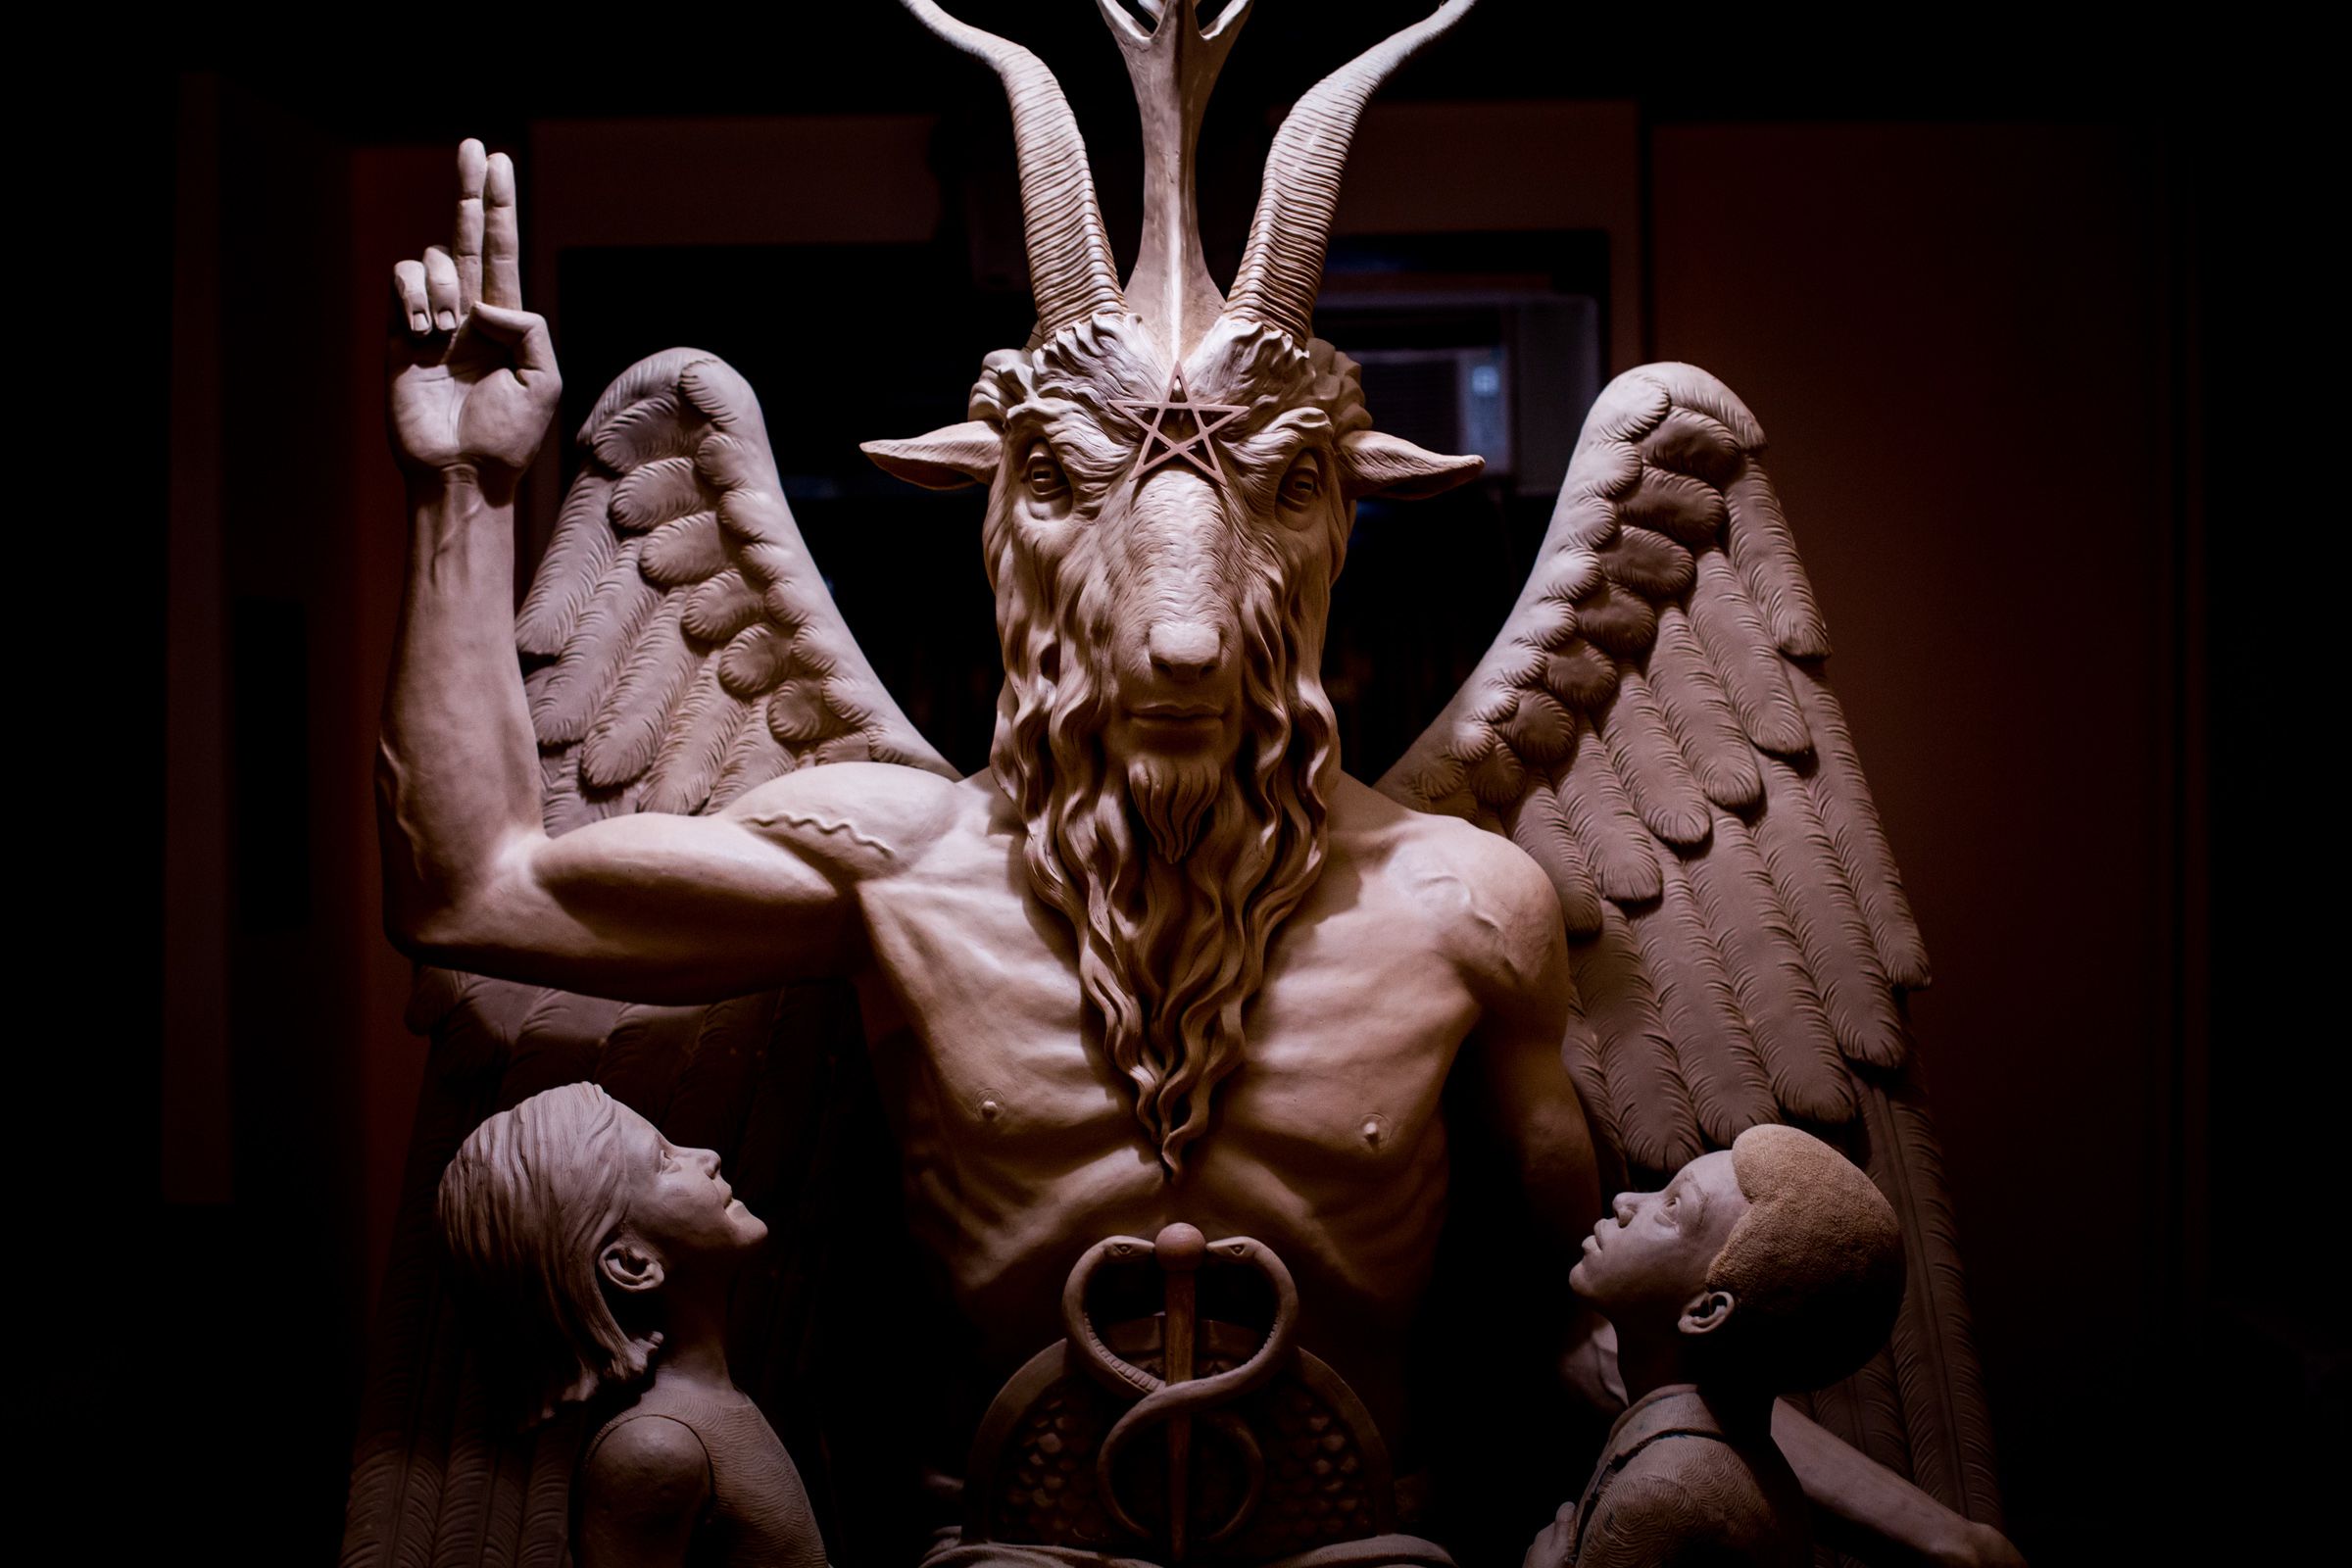 This 2014 photo provided by The Satanic Temple shows a bronze Baphomet, which depicts Satan as a goat-headed figure surrounded by two children.